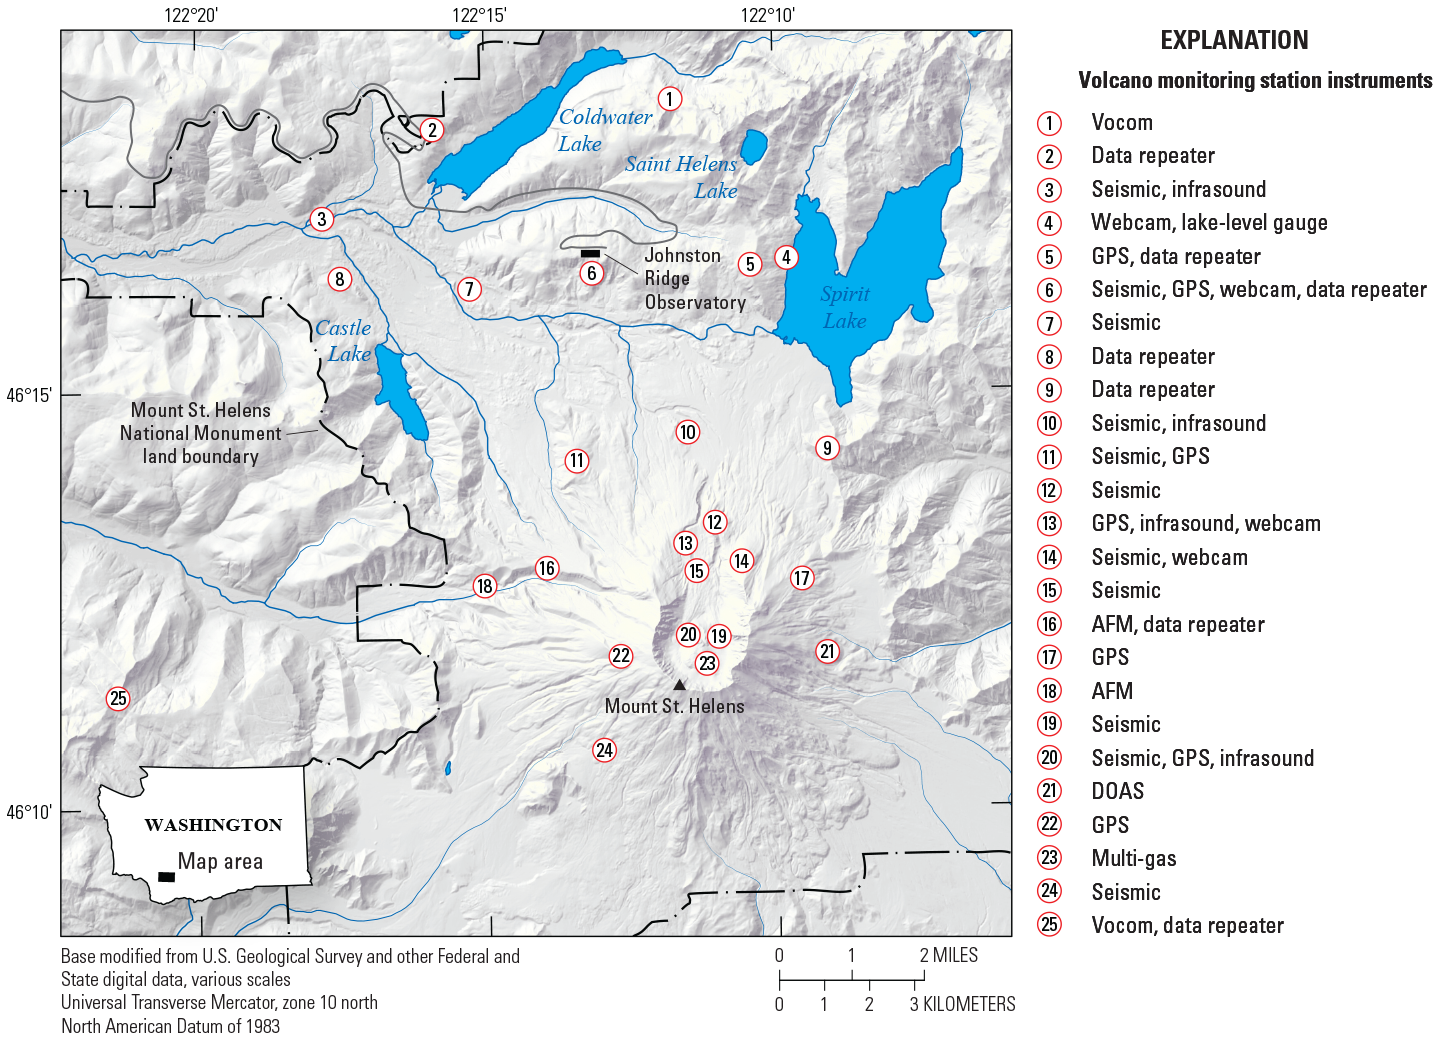 Figure 2. Topography of Mount St. Helens volcano. Scattered around the volcanic cone
                     are numbered circles representing various sensors. Twenty-five numbered circles are
                     distributed on and near the volcano, within approximately a 6-mile radius of the center
                     of the volcano.